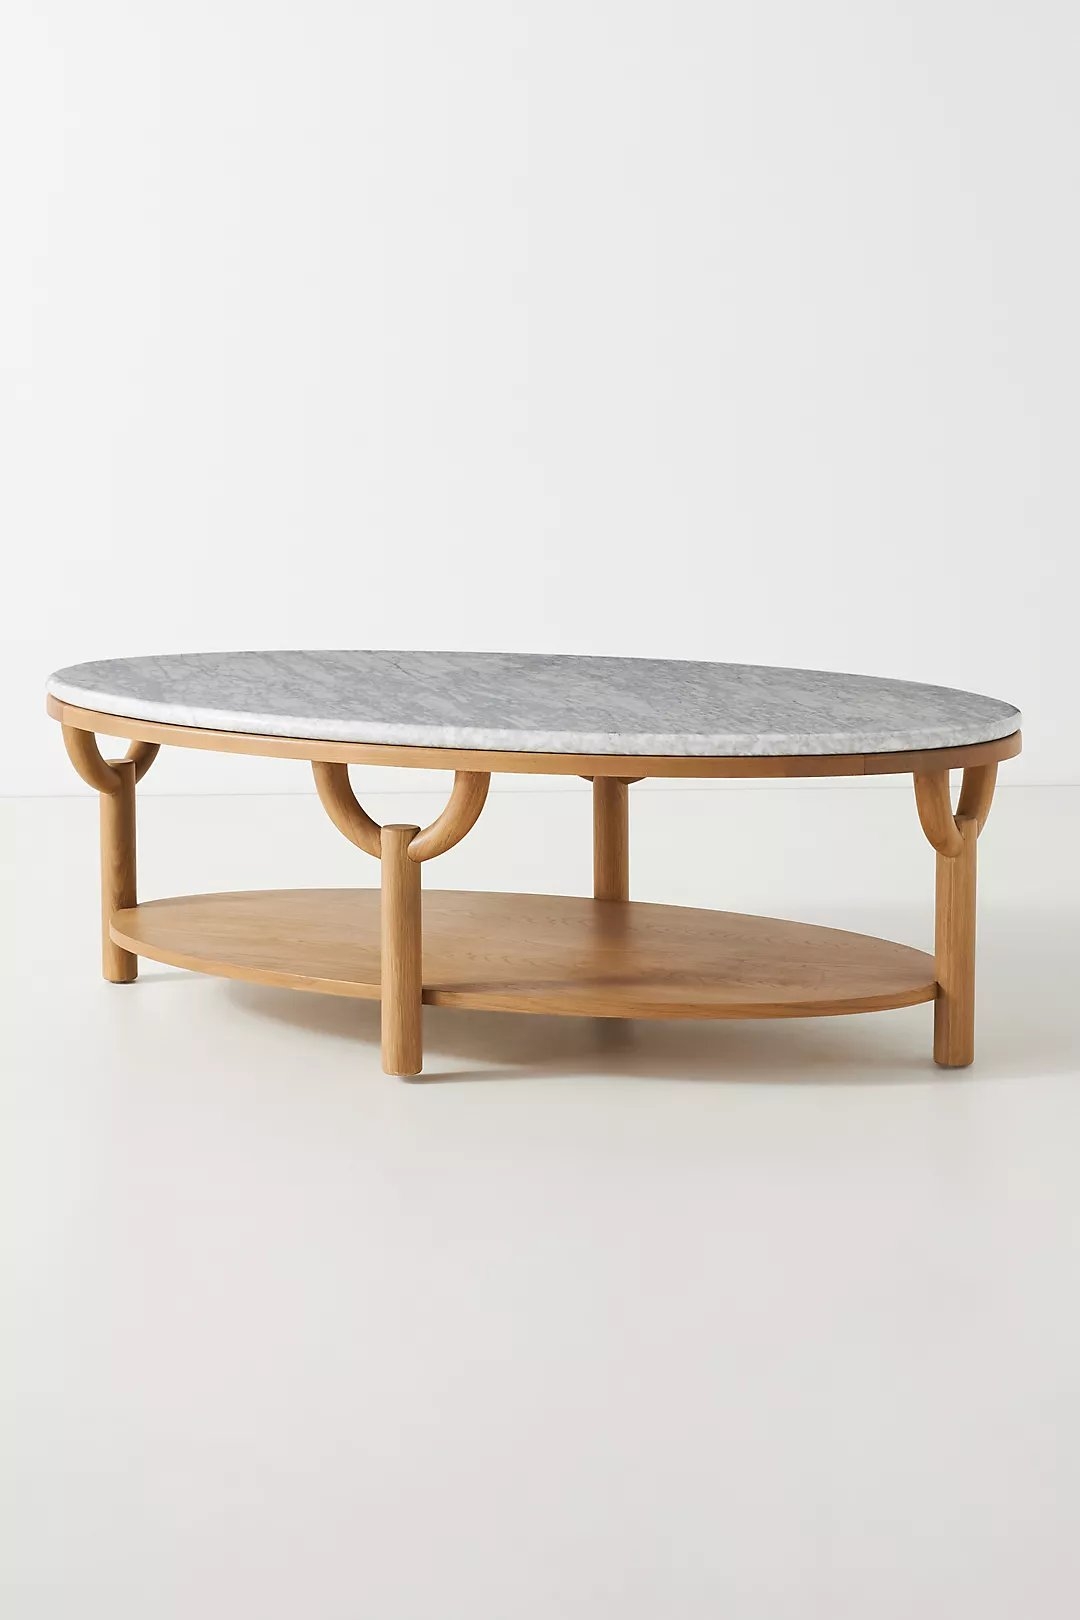 Arches Oval Coffee Table, Beige - Image 4